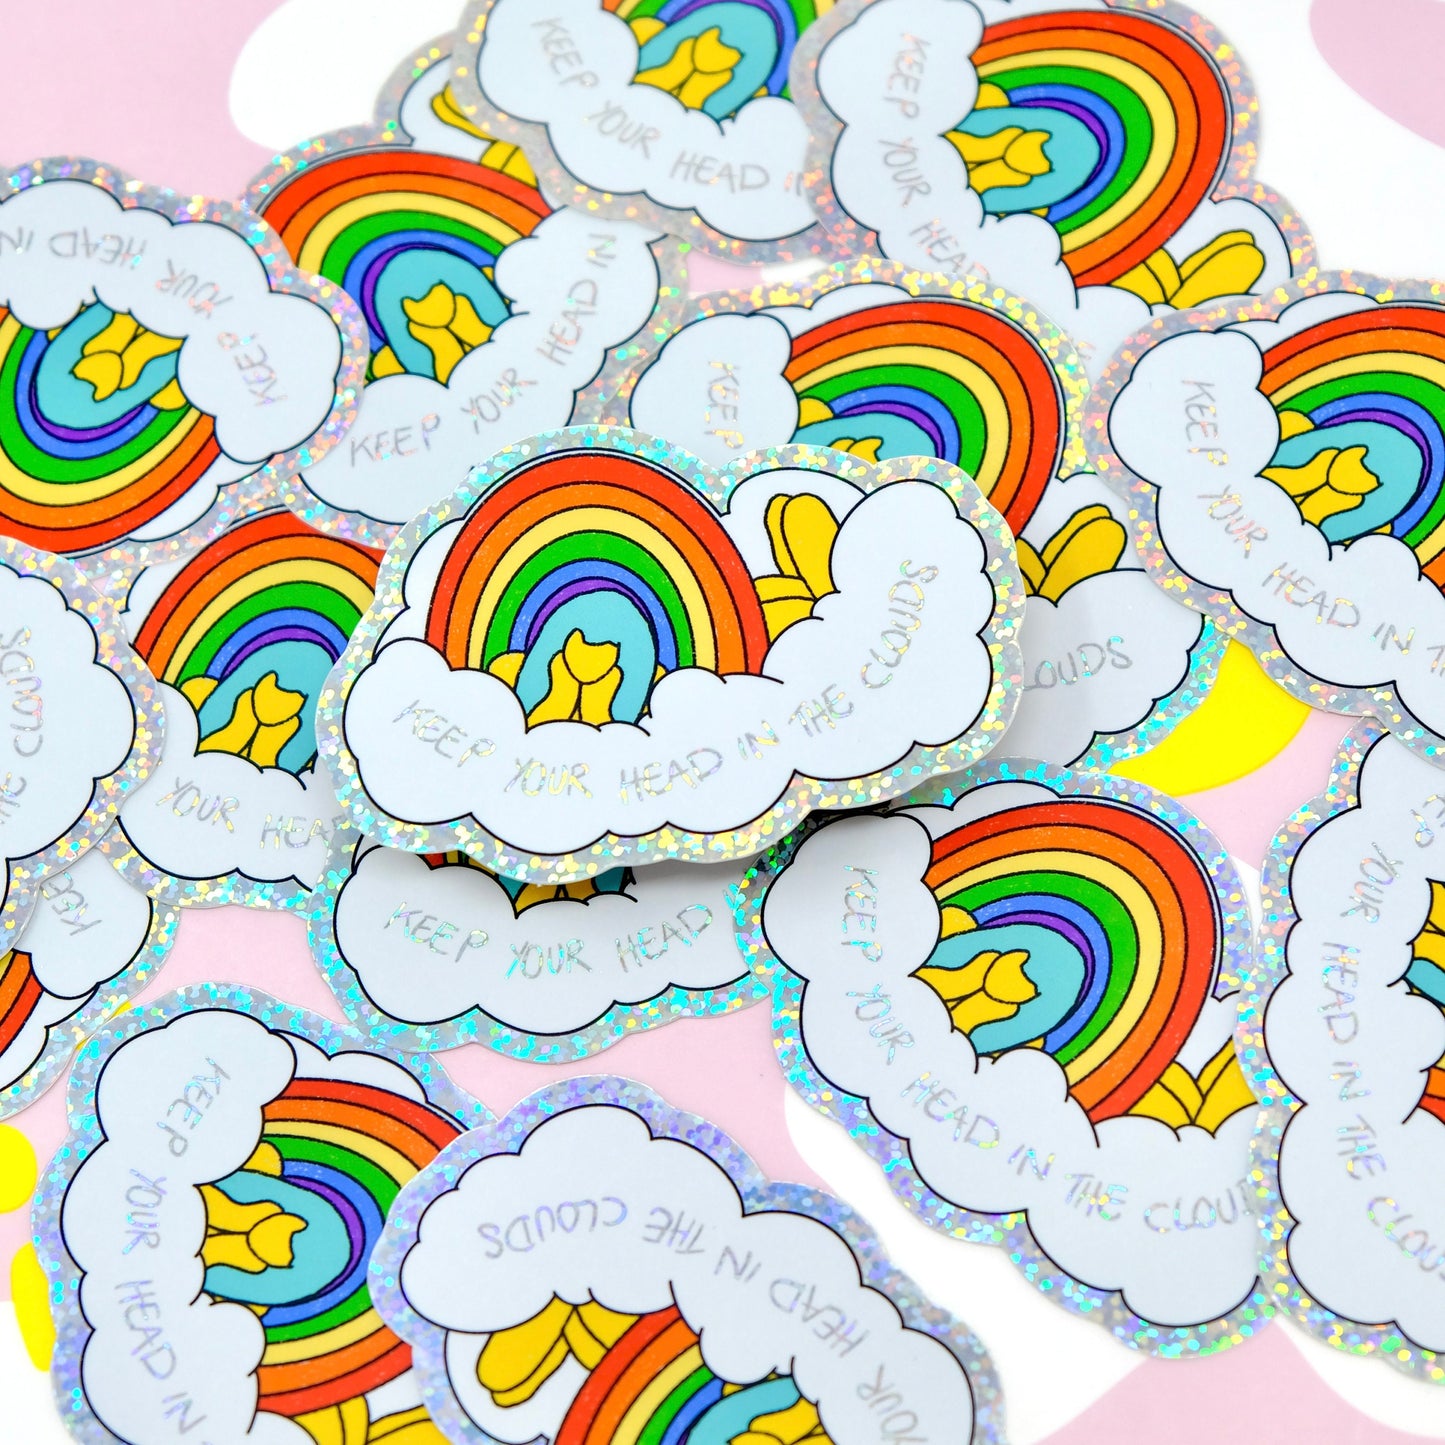 Keep Your Head in the Clouds Glitter Effect Vinyl Sticker